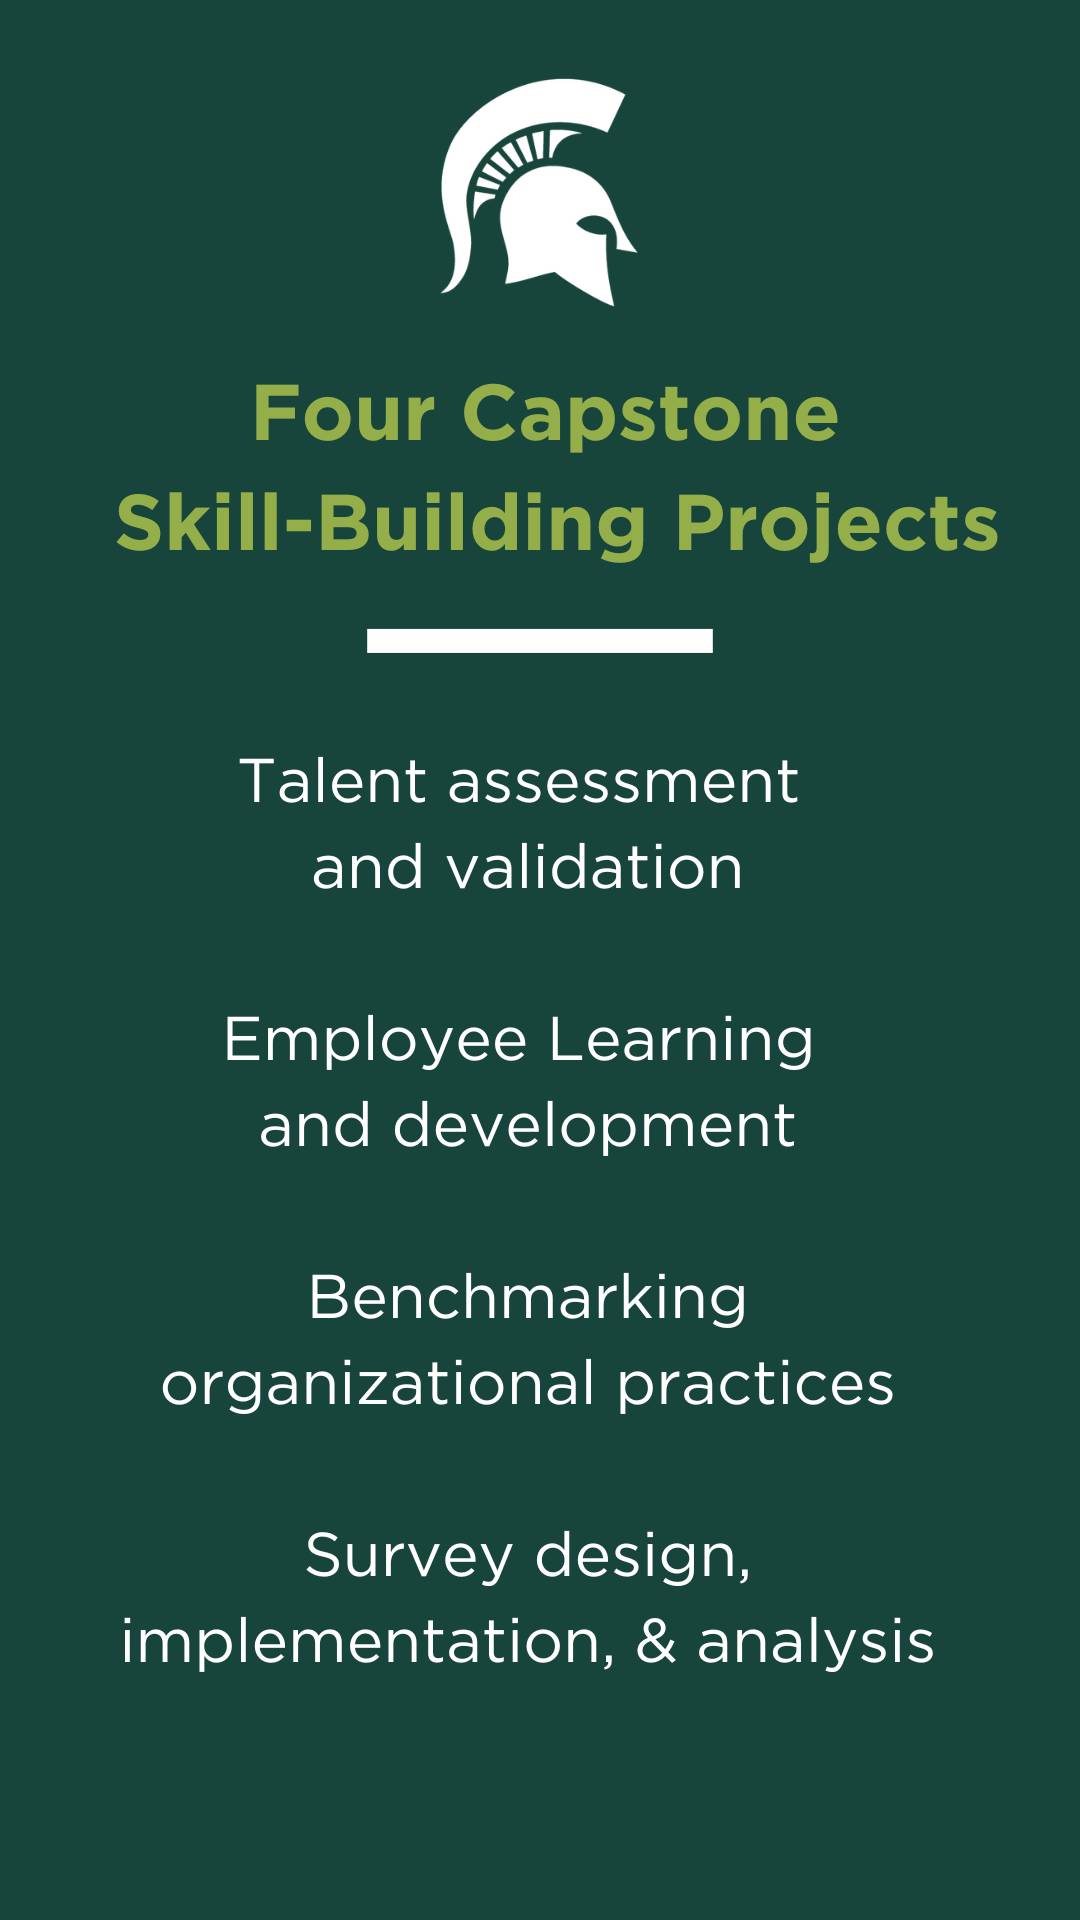 A green graphic that has the Spartan head and says "Four Capstone Skill-Building Projects at the top. It then lists "talent assessment and validation", "Employee learning and development", "Benchmarking organizational practices", and "Survey design, implementation, & analysis"